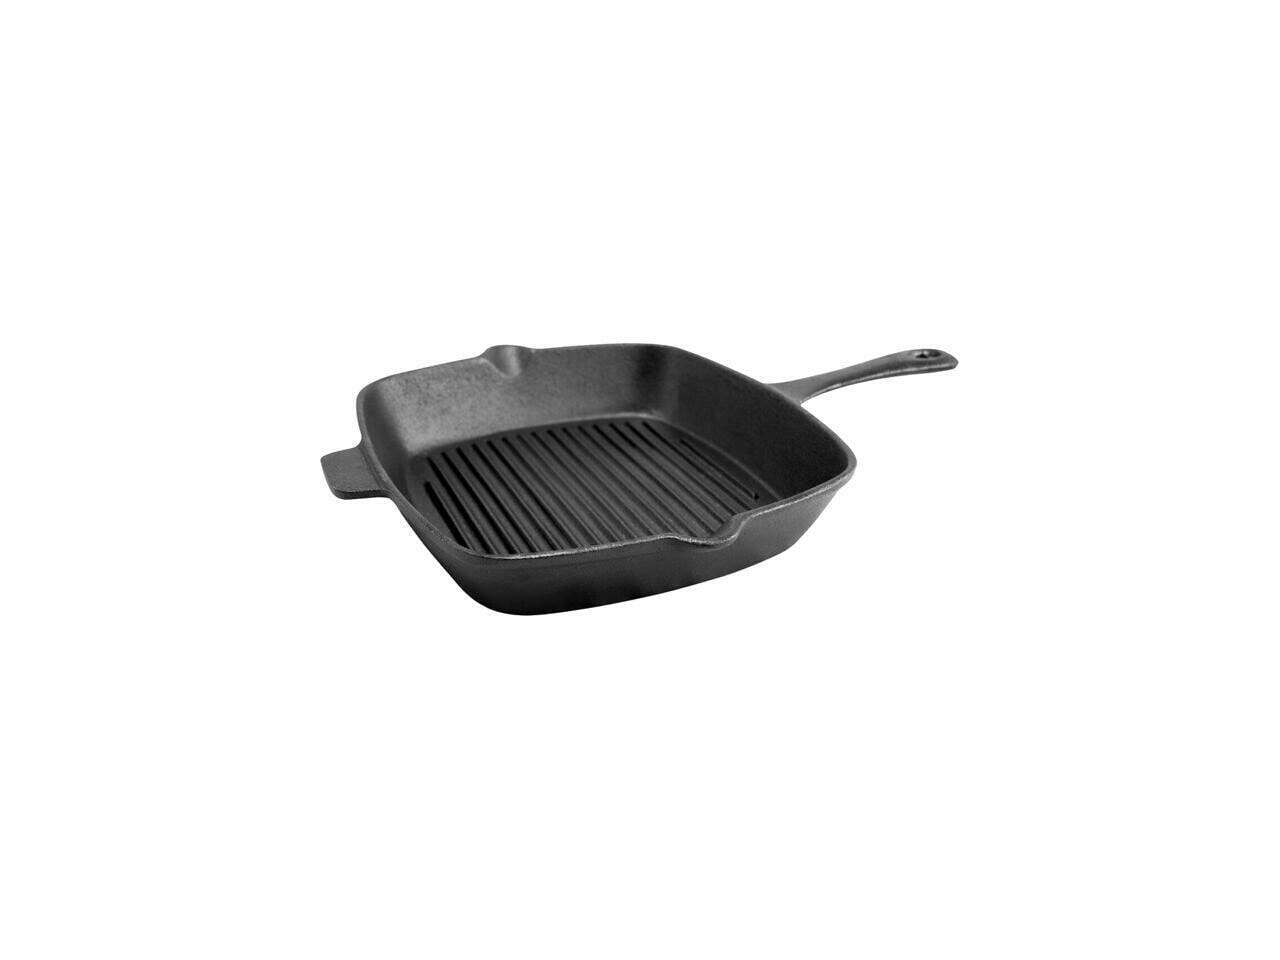 Gibson General Store Addlestone 10 inch Square Preseasoned Cast Iron Grill Pan